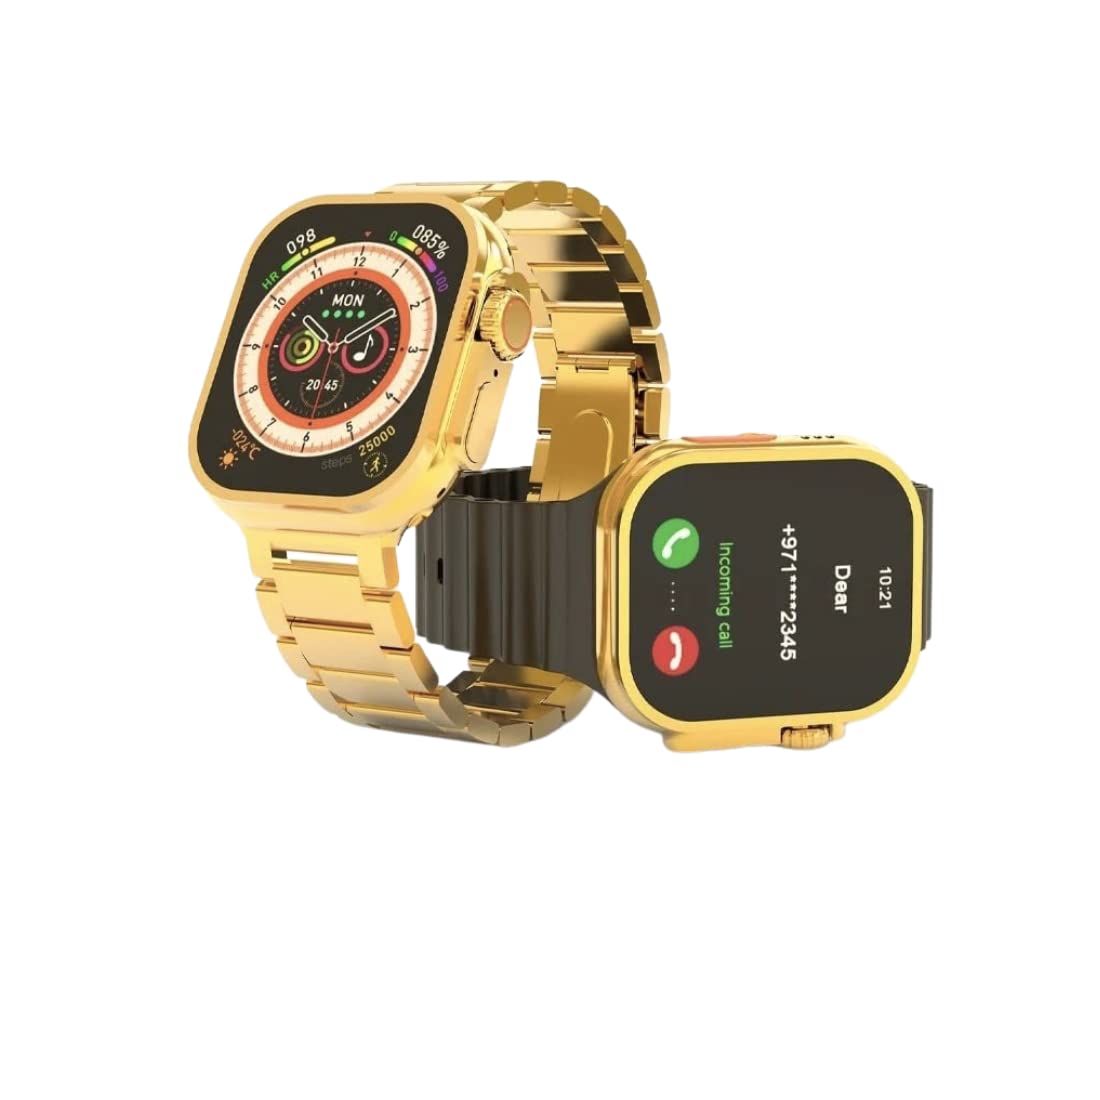 24K Gold Ultra Watch 2.02 INCH Latest 8 Series AMOLED 520 * 580 PIXAL with Sports & Health Tracker,GPS, NFC, WIRLESS CHARGERING, and Apple Logo on/Off (Gold Edition 24K Colour)